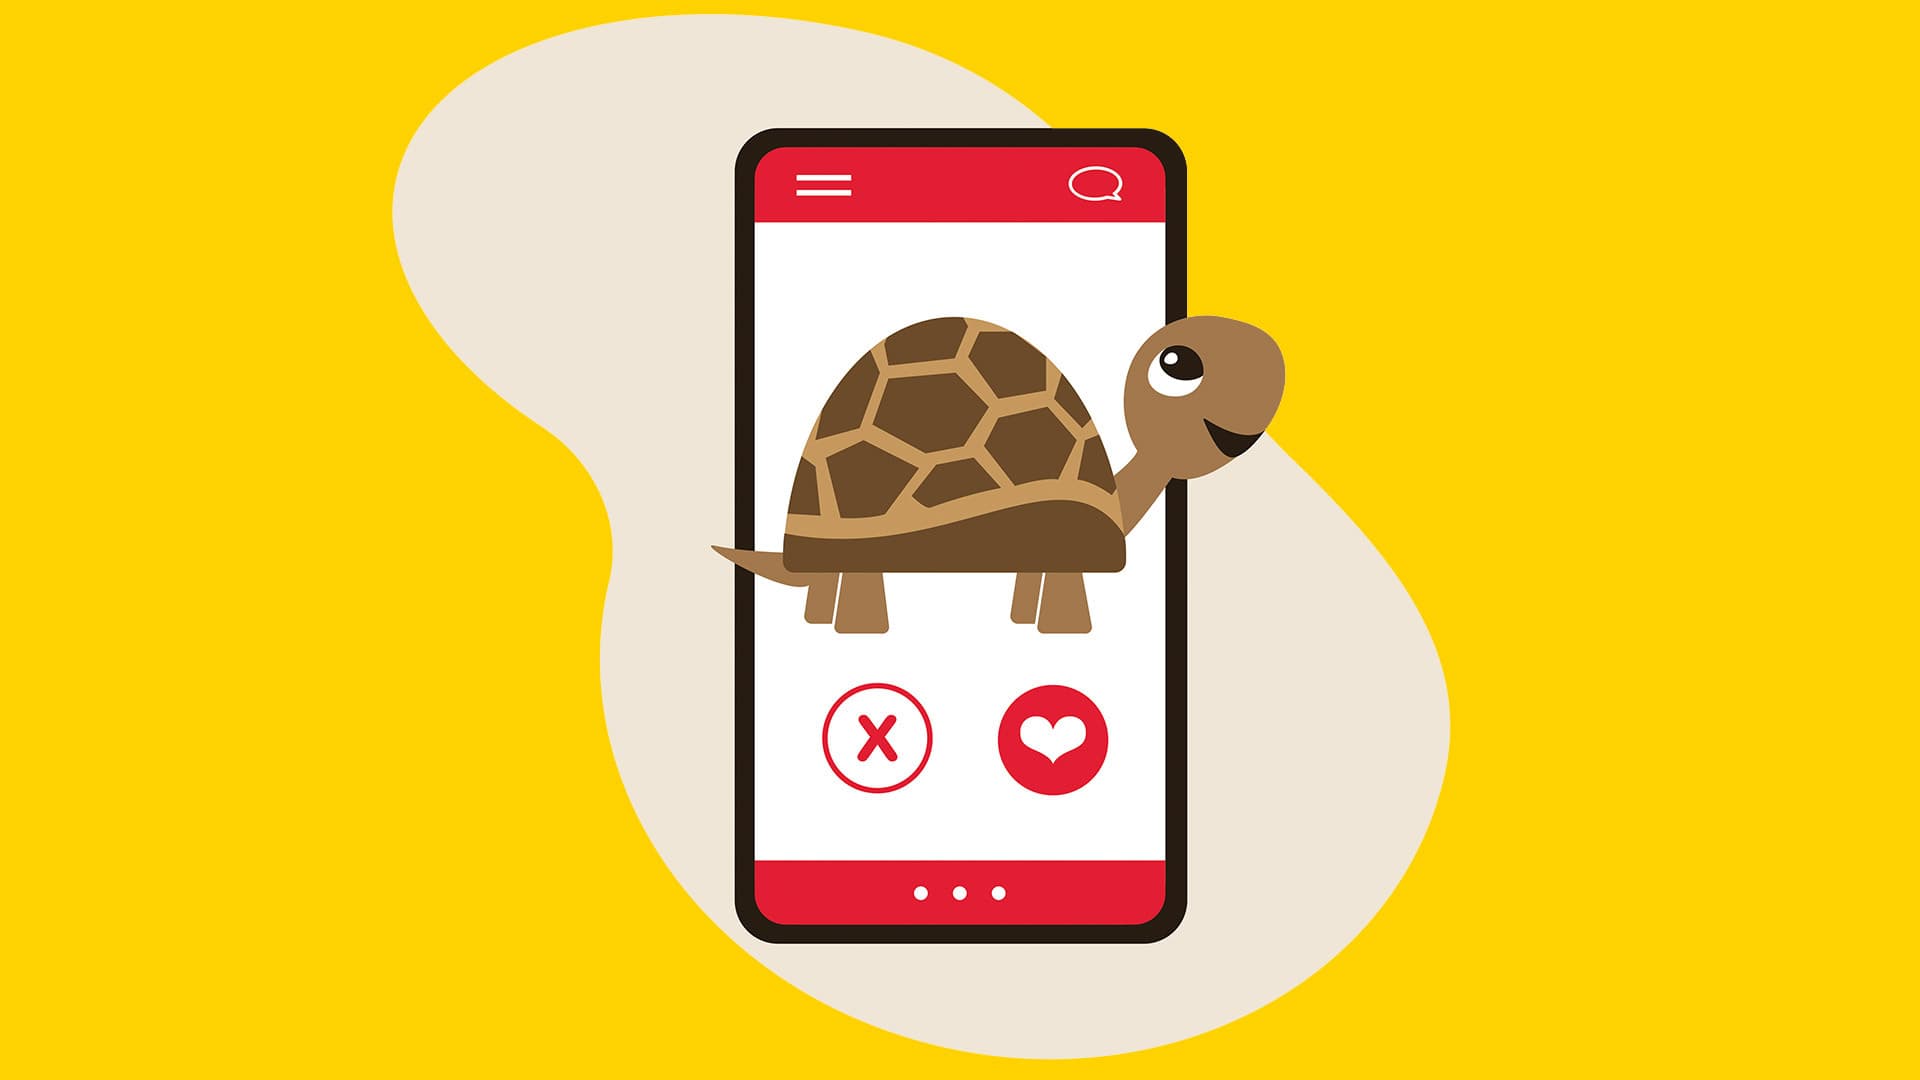 Illustration of a turtle on a dating app